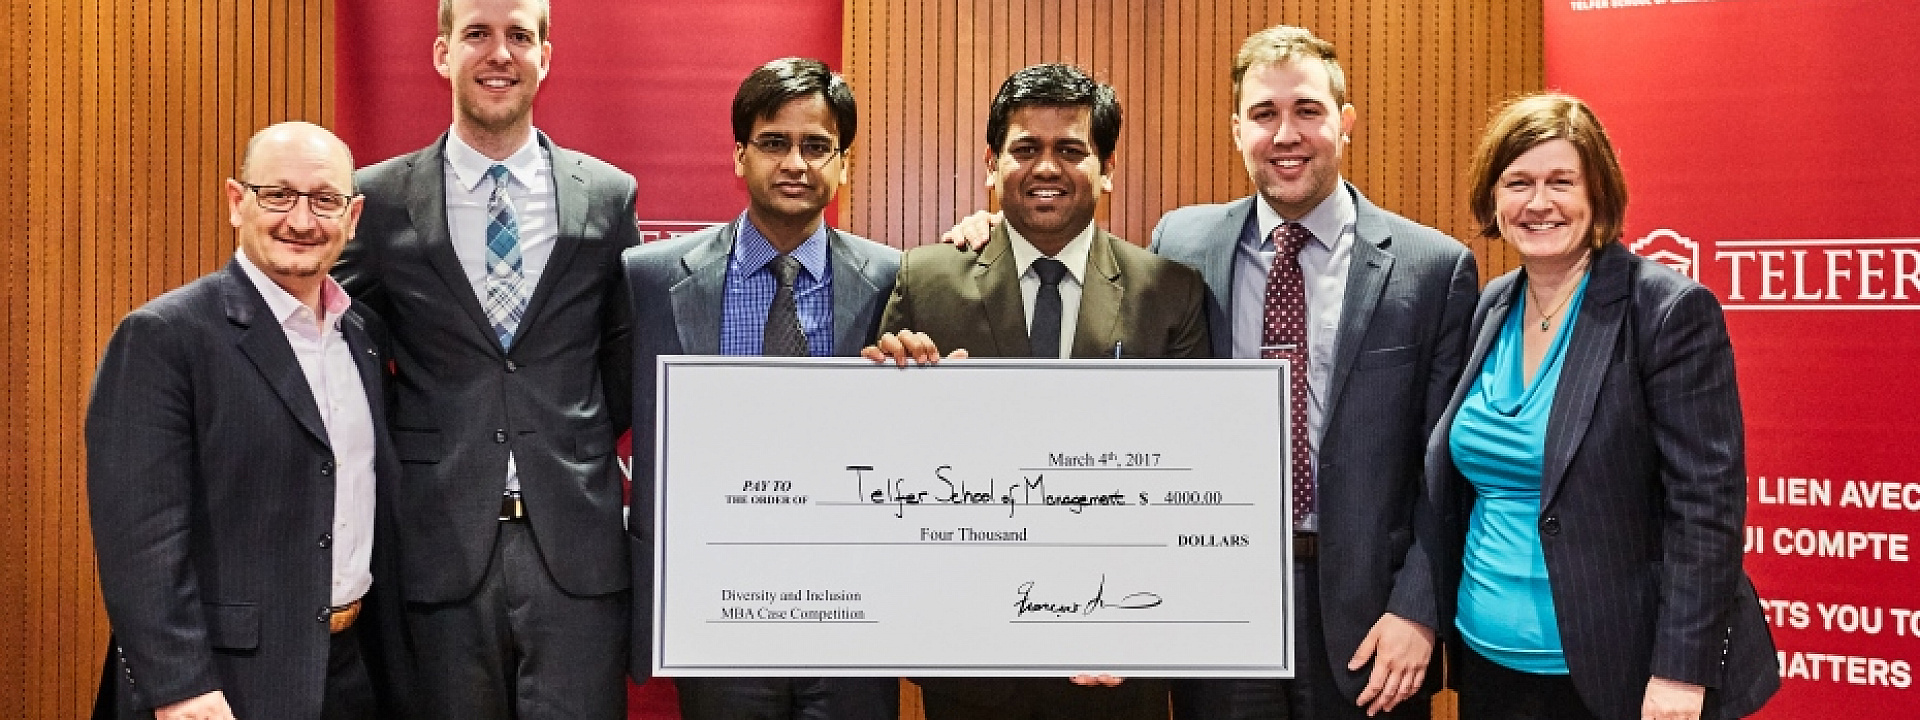 Telfer promotes Diversity and Inclusion during Second Annual Case Competition